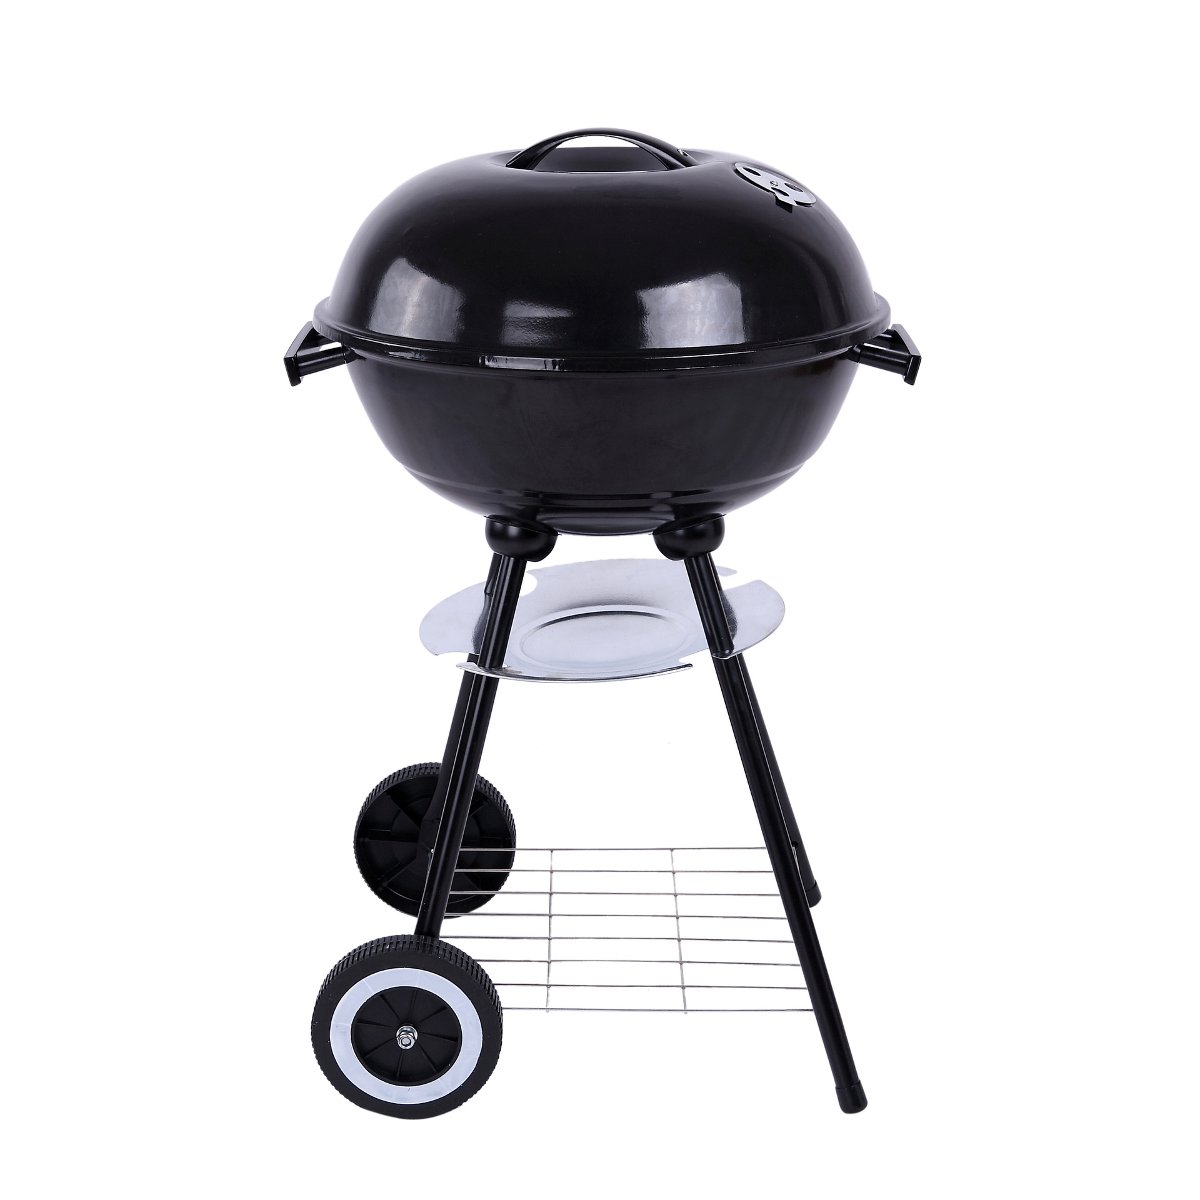 17'' Metal Charcoal BBQ Grill Pit Outdoor Camping Cooker Garden Barbecue Tools BBQ Accessories Cooking Tools with Trolley